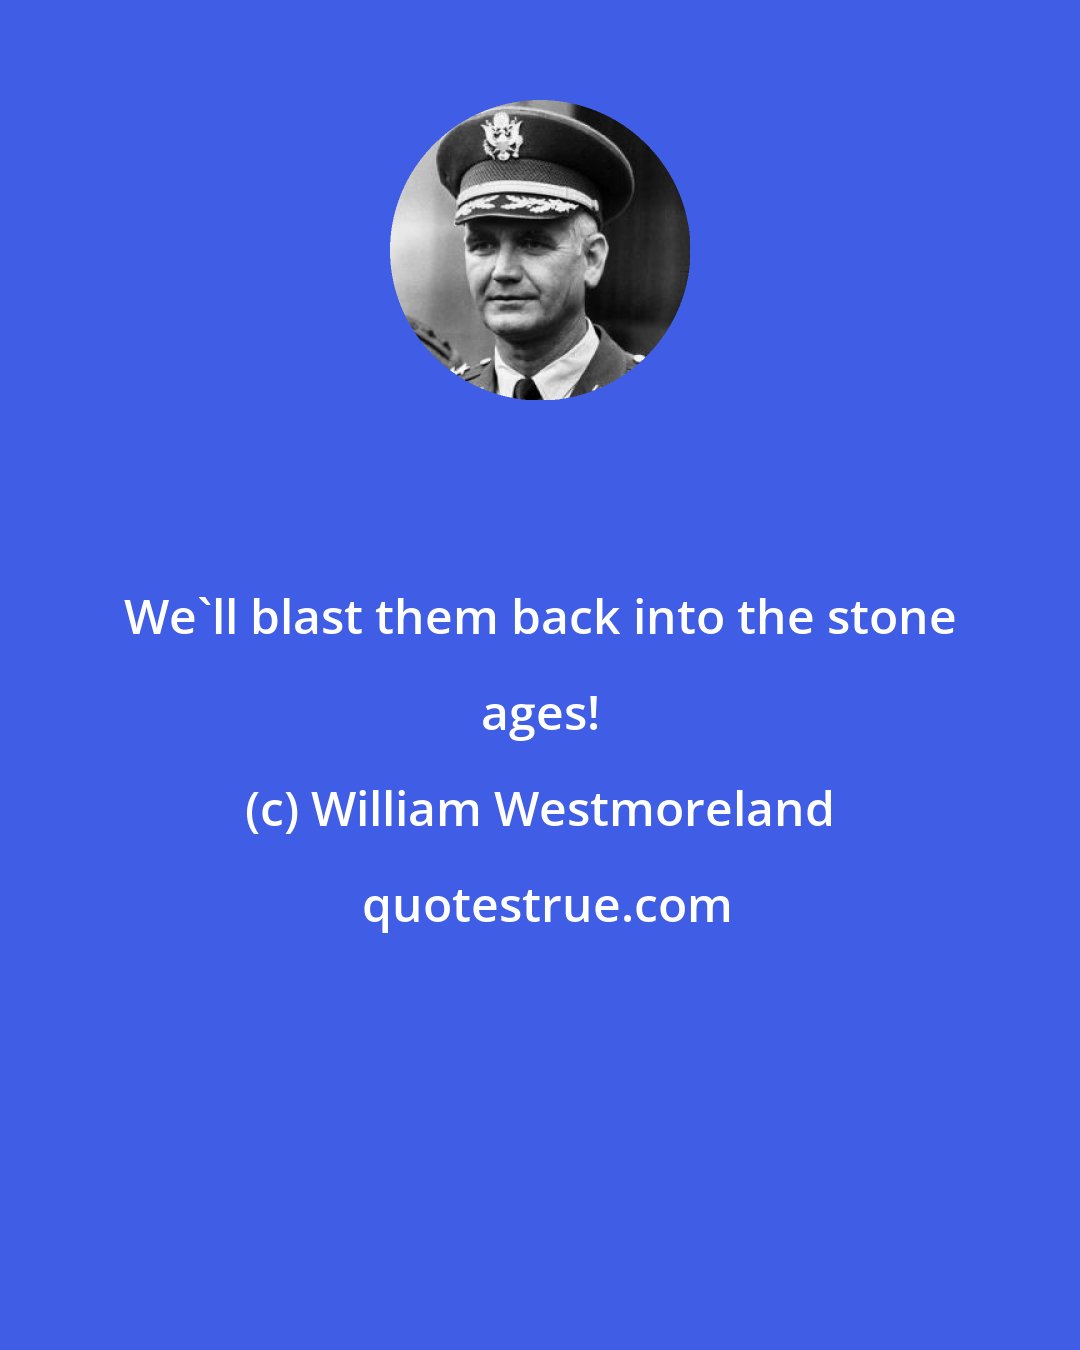 William Westmoreland: We'll blast them back into the stone ages!